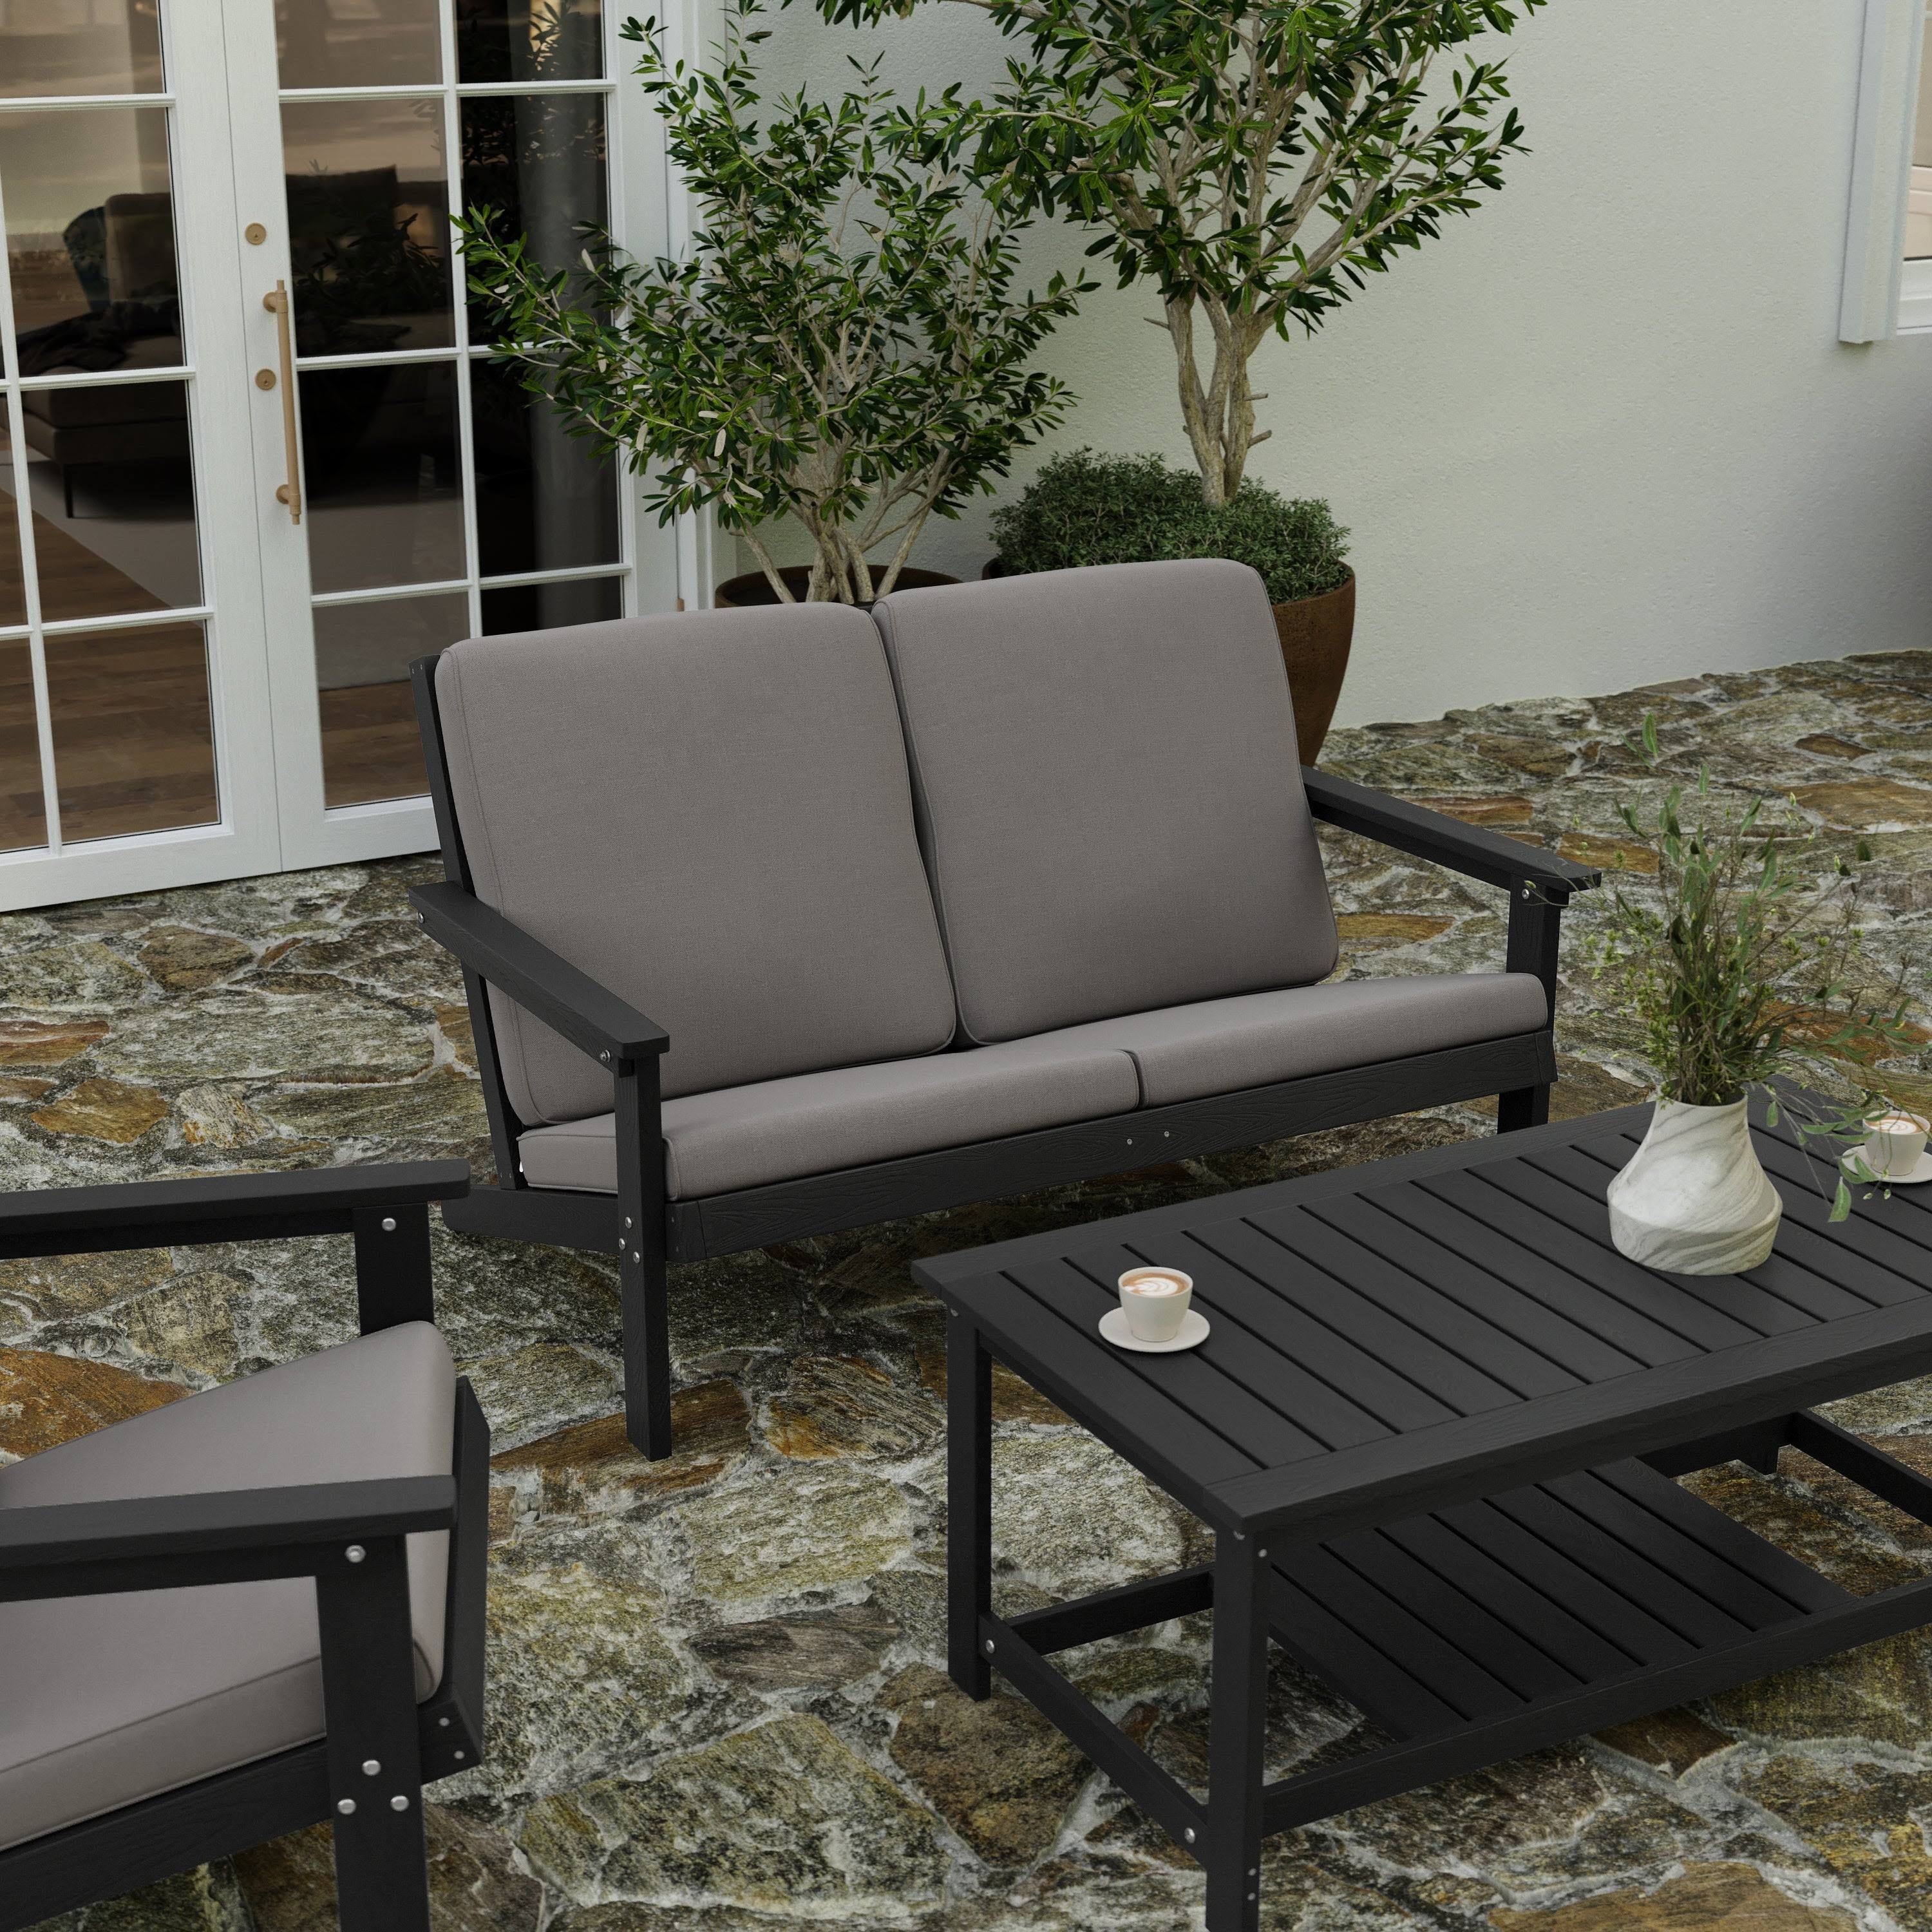 Merrick Lane Outdoor Loveseat for All-Weather Patio Use | Image